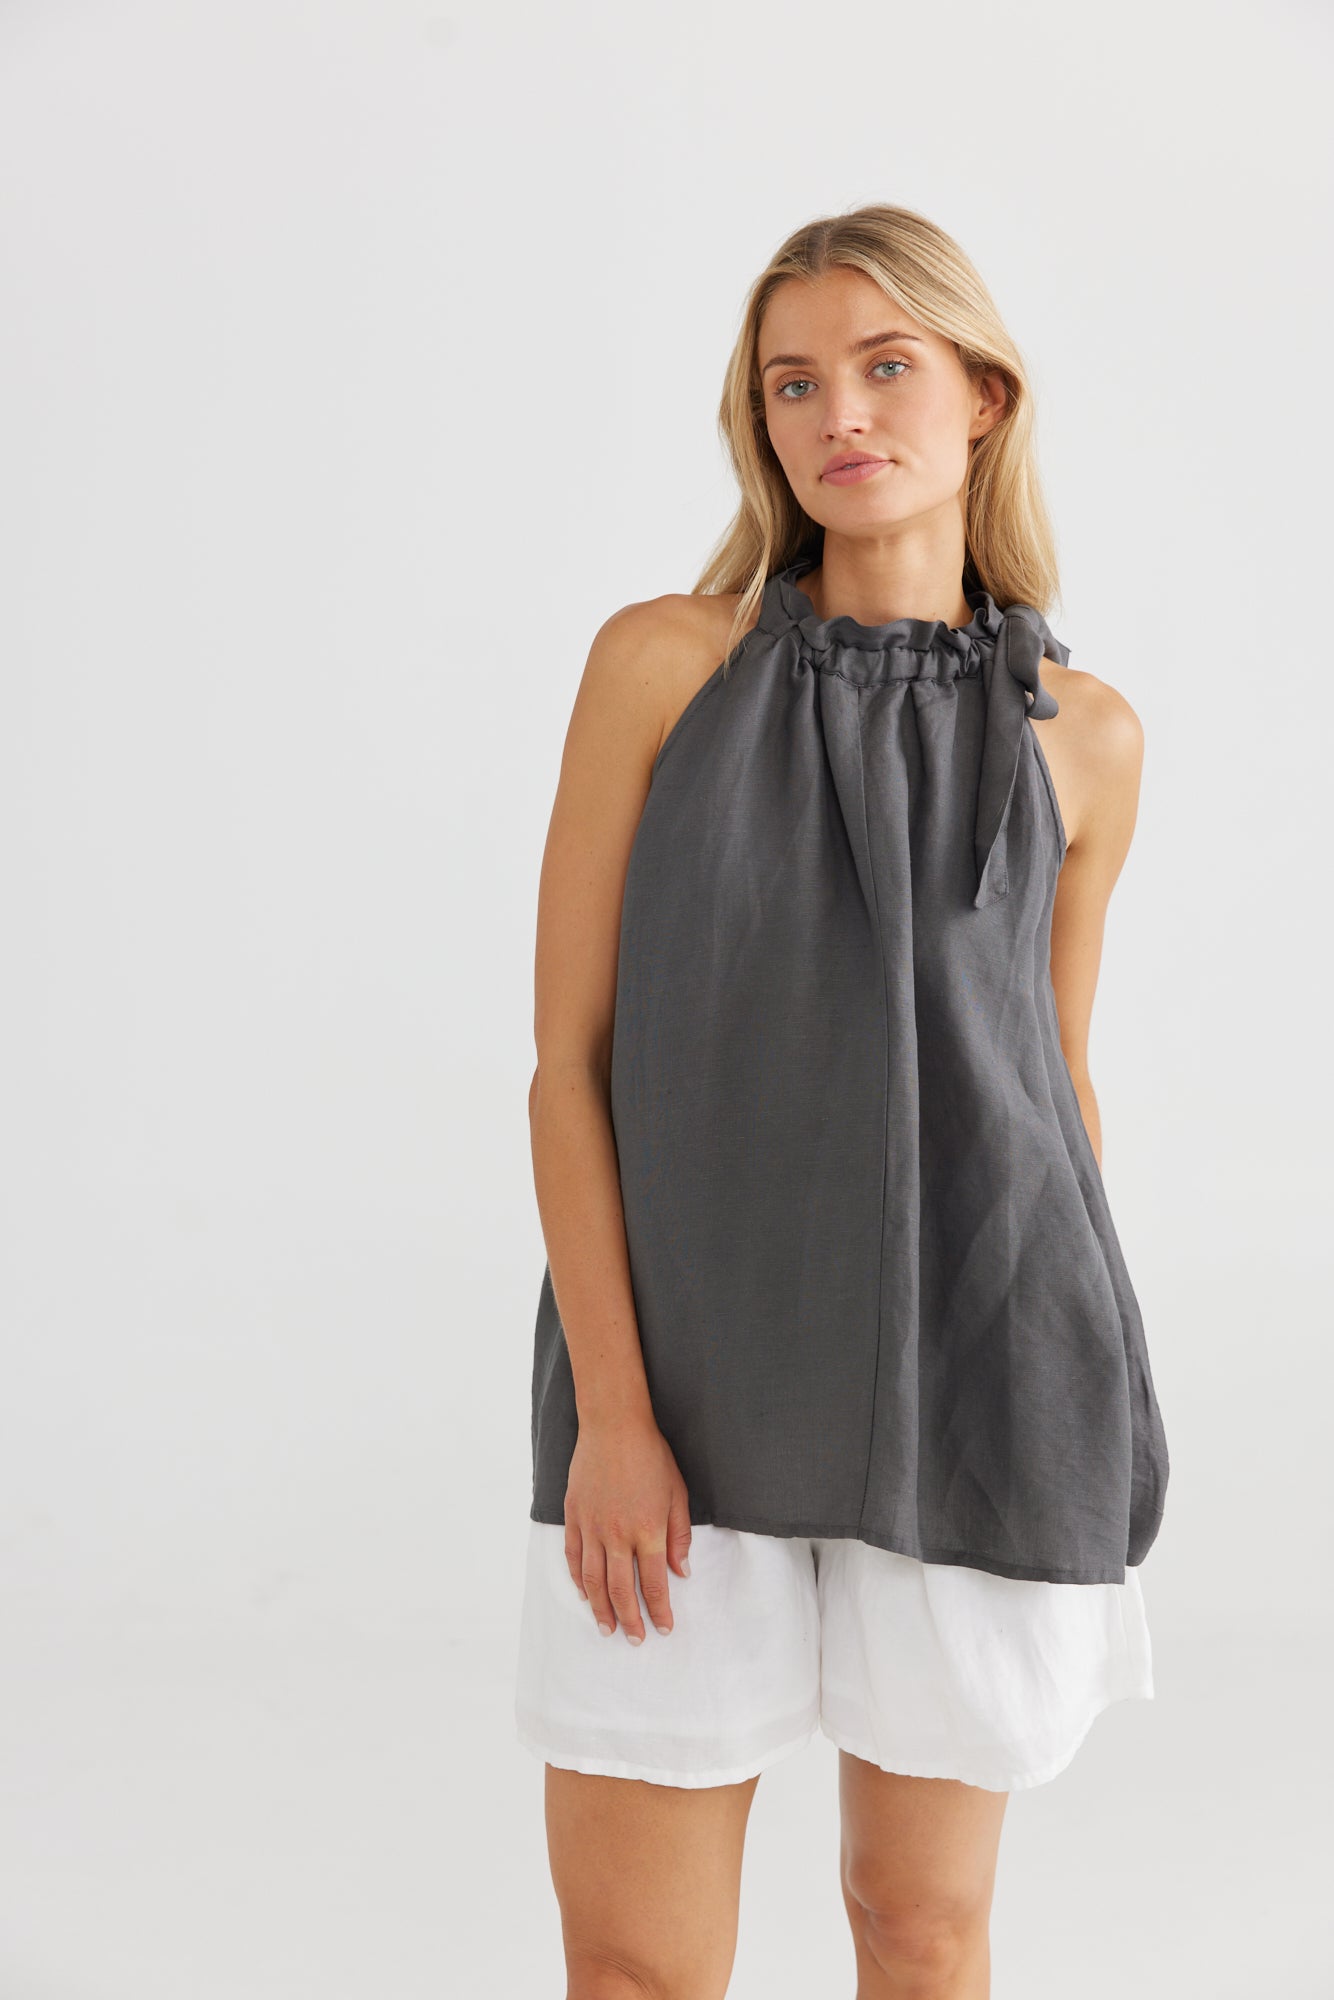 
                  
                    Lucia Top Floaty, relaxed fit Halter neck Paper bag drawstring neckline Charcoal - 55% Linen, 45% Viscose White - 100% Linen, lining 100% cotton
                  
                